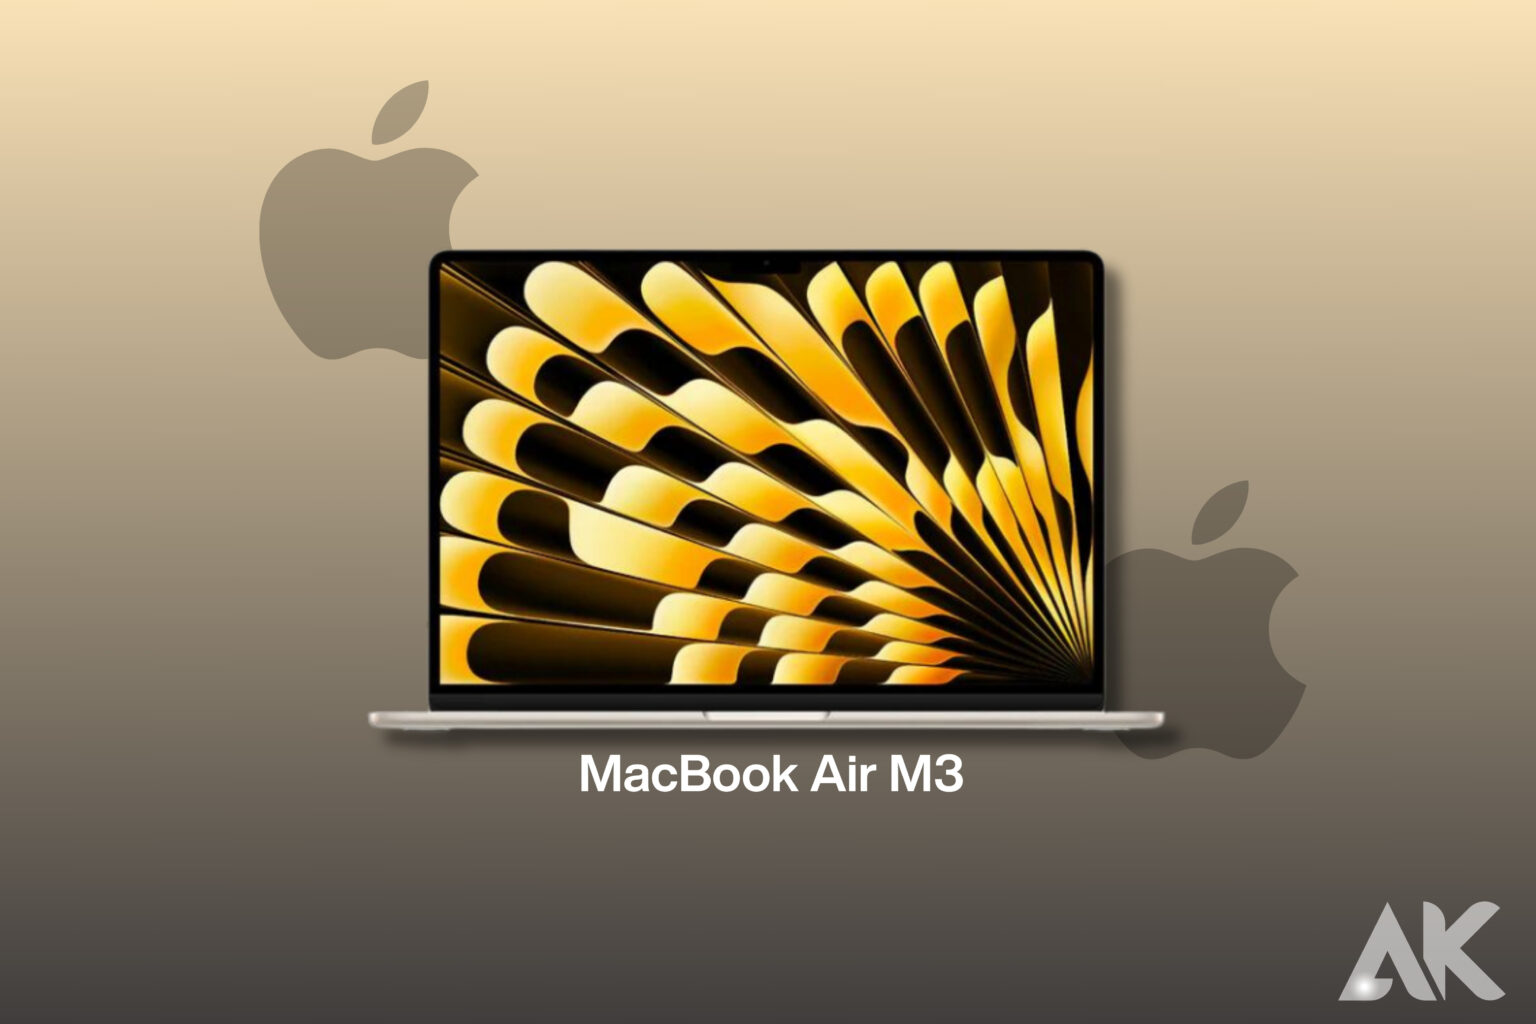 _Potential Performance of the 15-inch Macbook Air M3